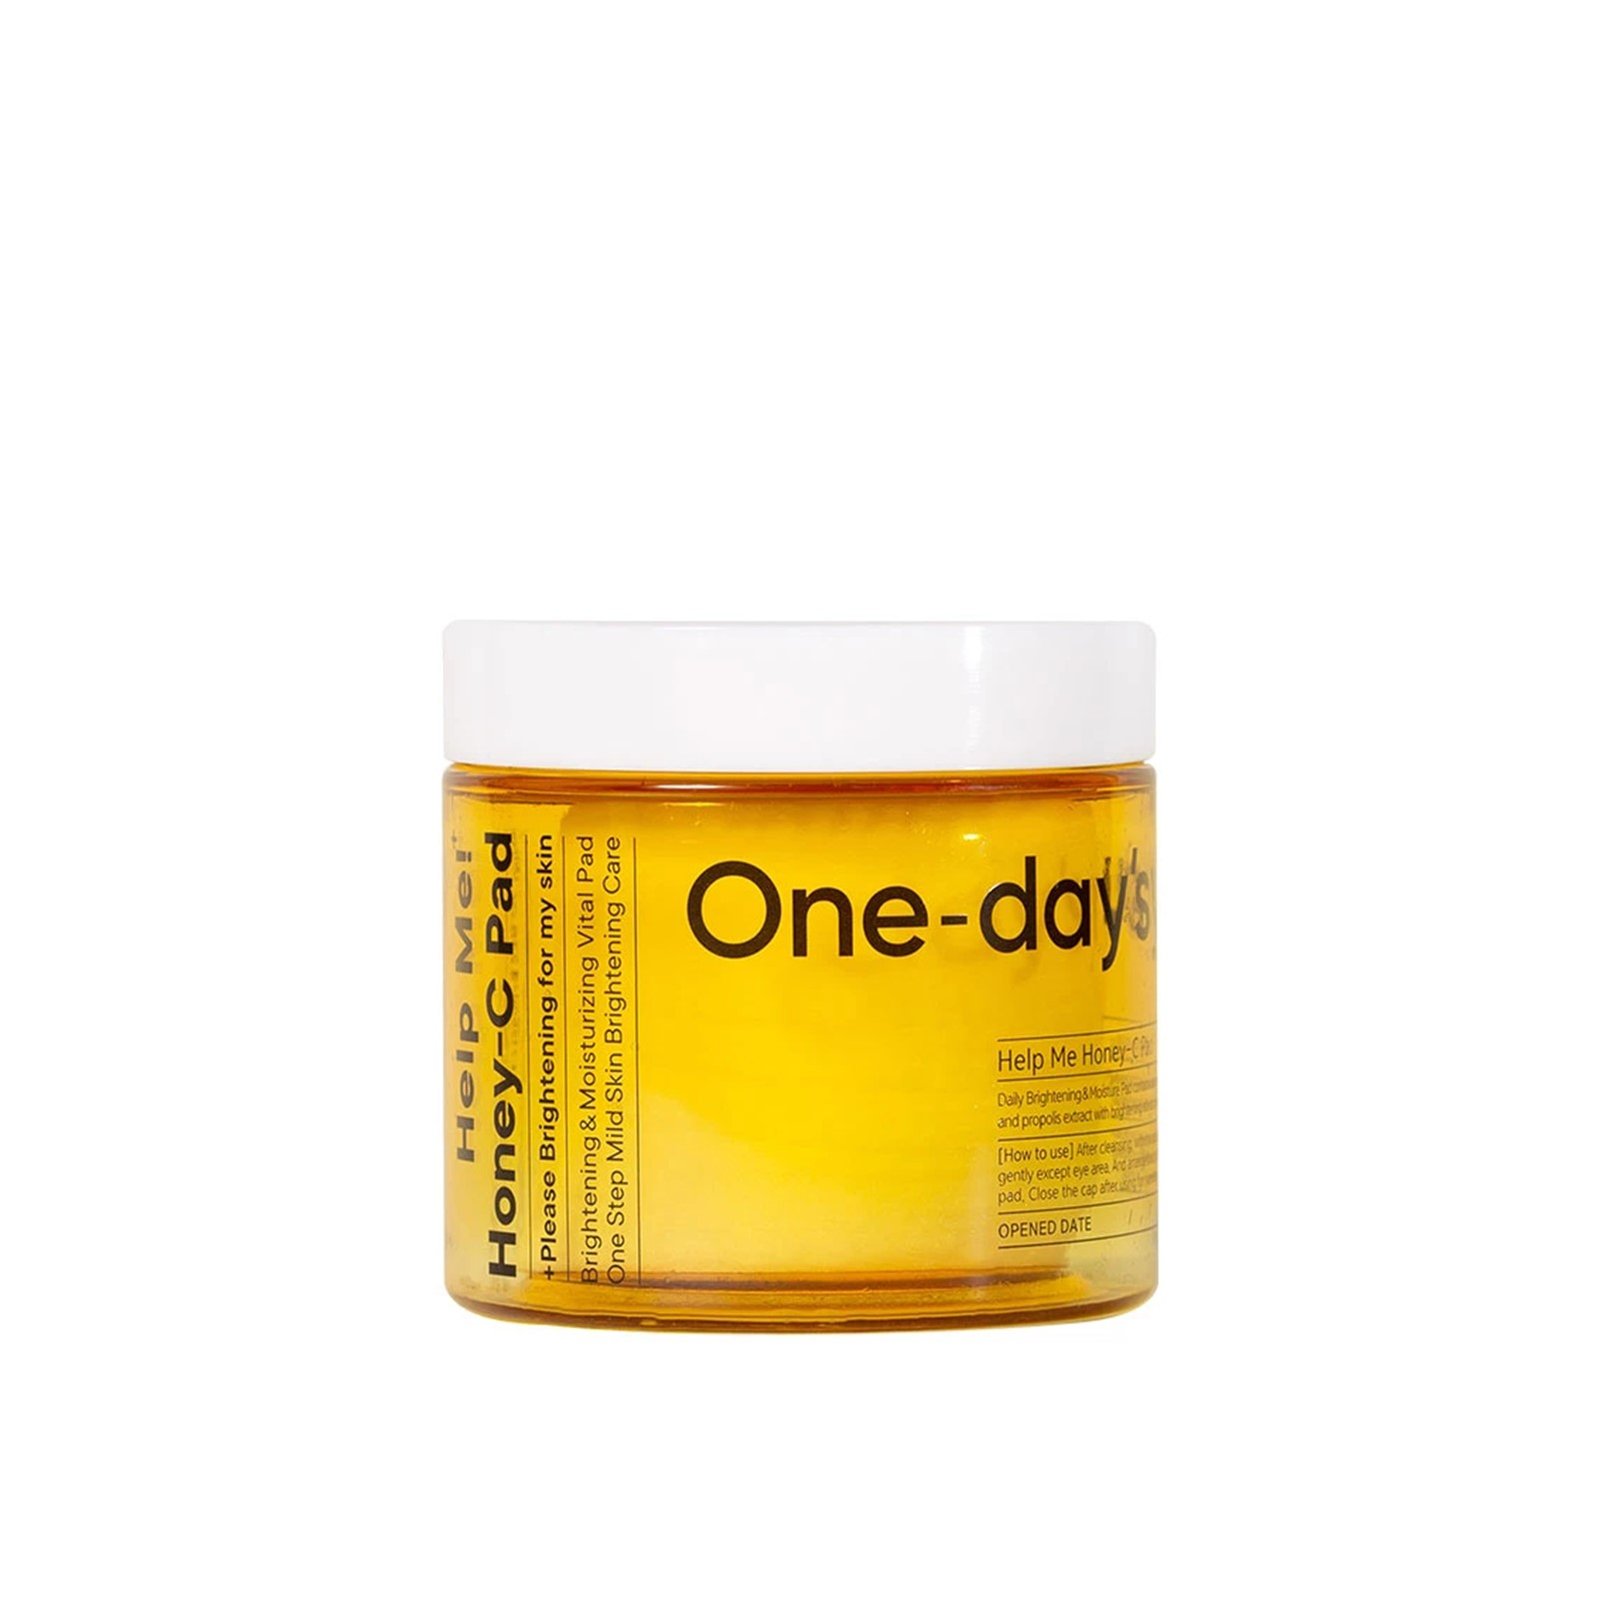 One-day's you Help Me Brightening Honey-C Pad x60